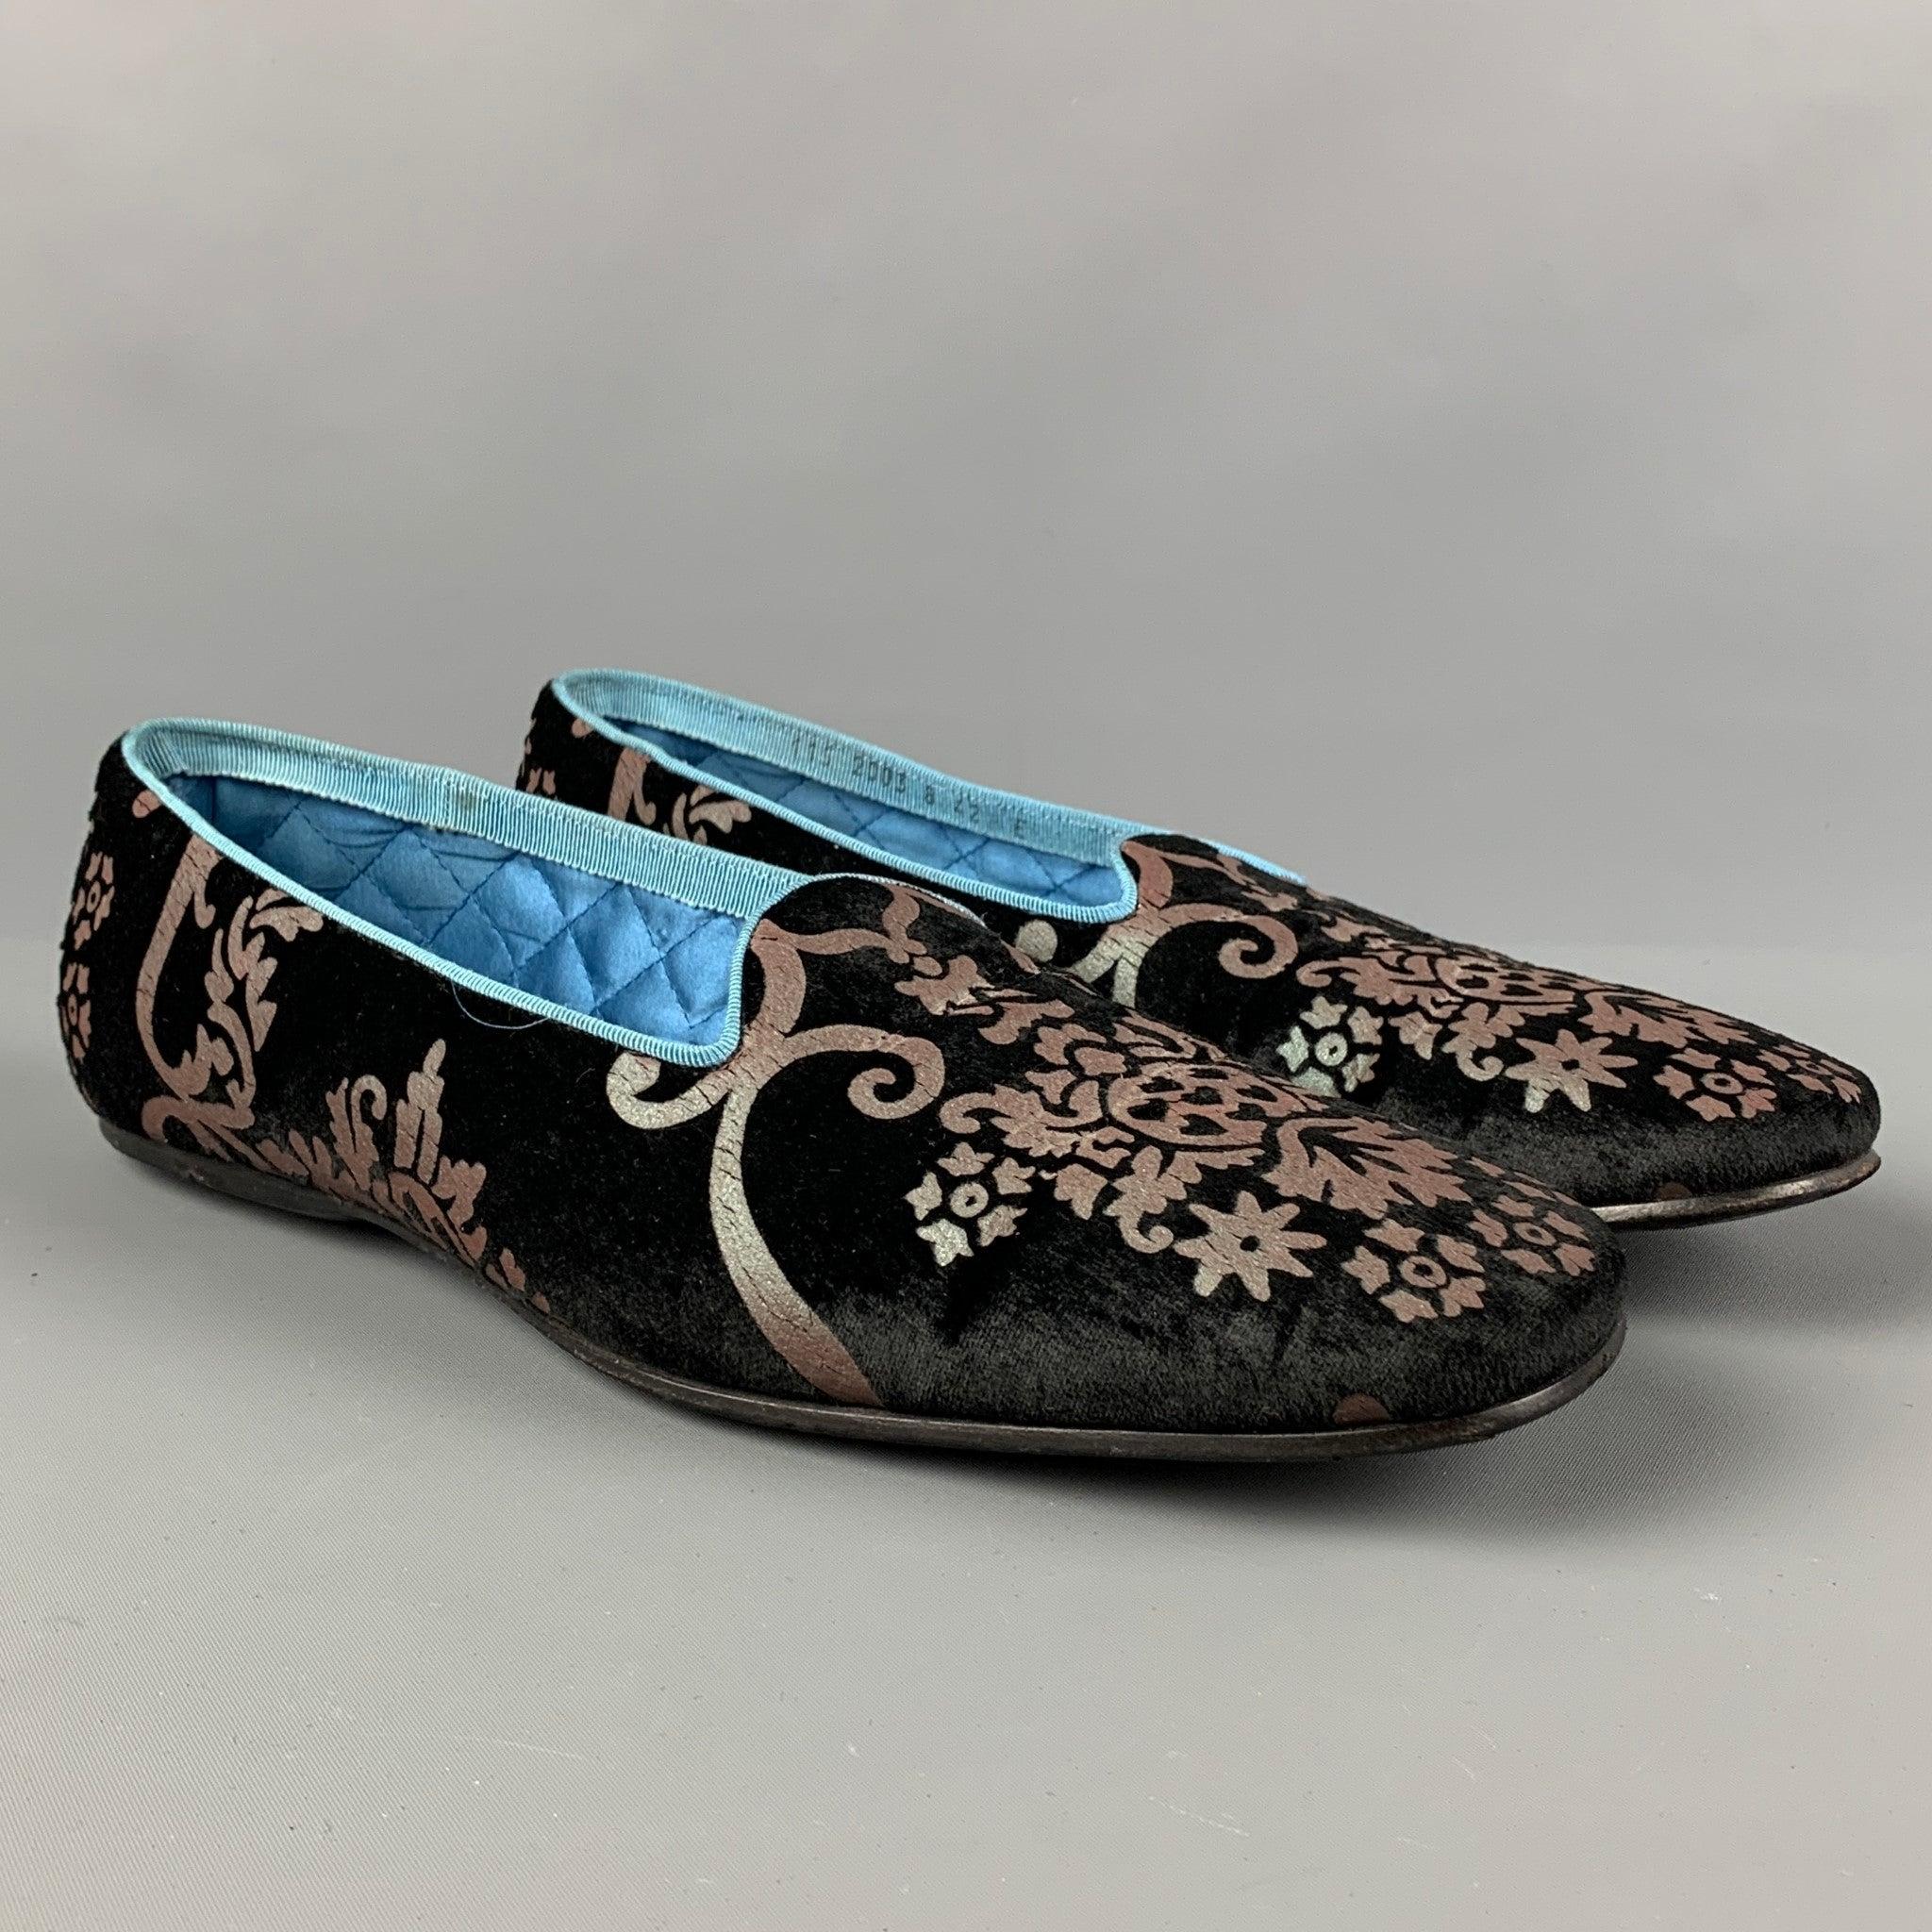 Vintage GUCCI by Tom Ford 2003 loafers comes in a black & grey floral jacquard material with a blue quilted interior featuring a slip on style and a square toe. Made in Italy.
Good
Pre-Owned Condition. Light wear. As-Is.  

Marked:   42Outsole: 11.5